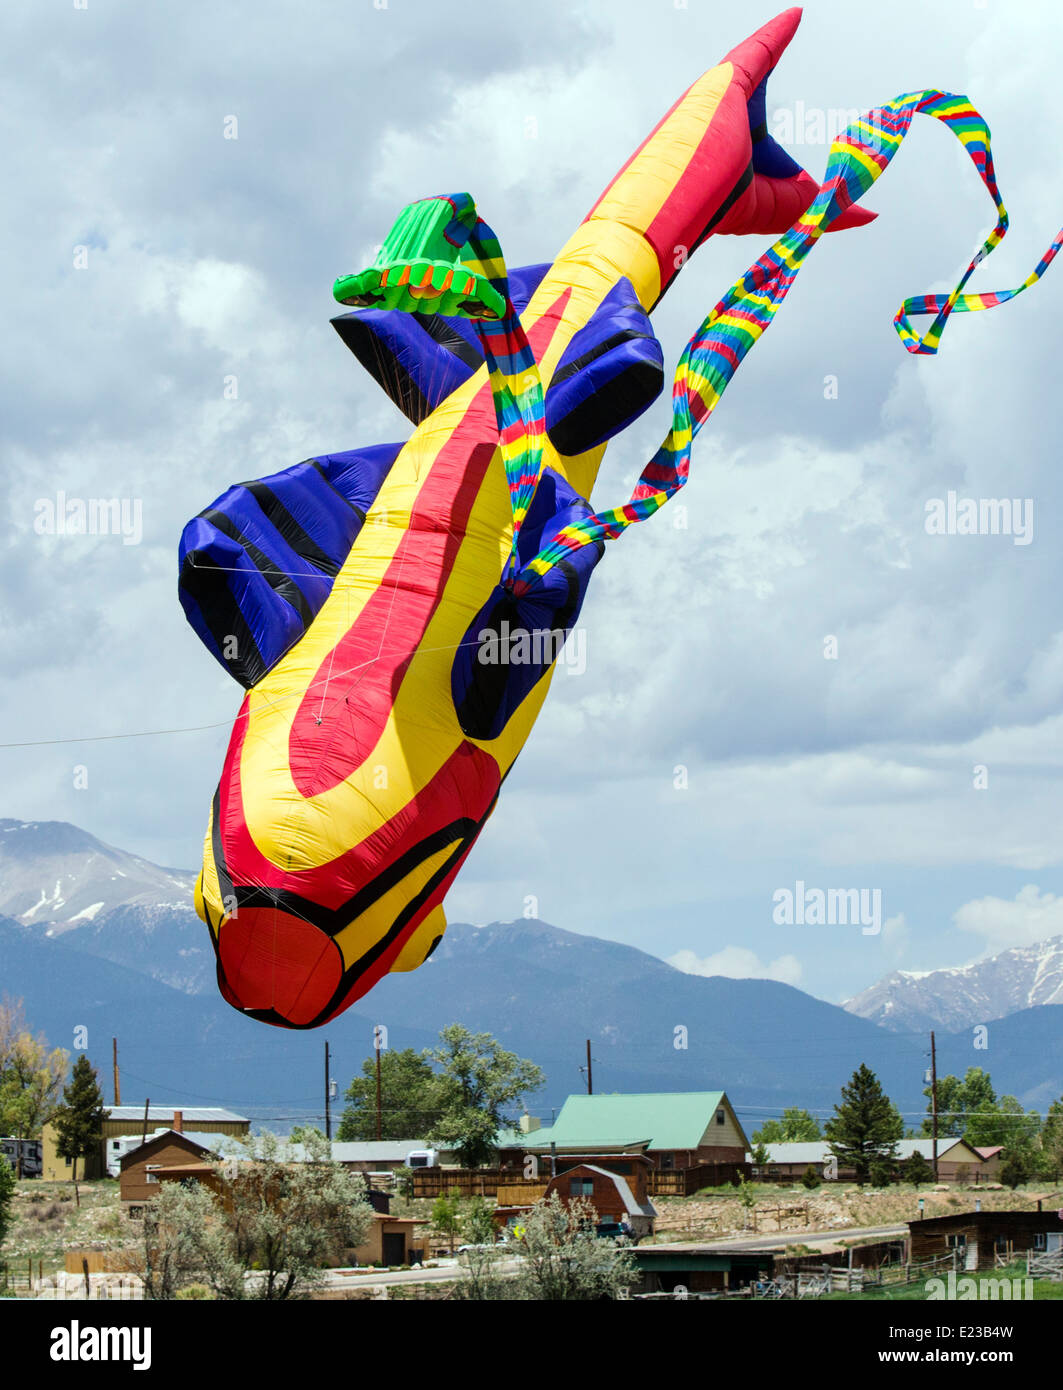 Fish and snake serpent shaped kites tangle & fall from the sky Stock Photo